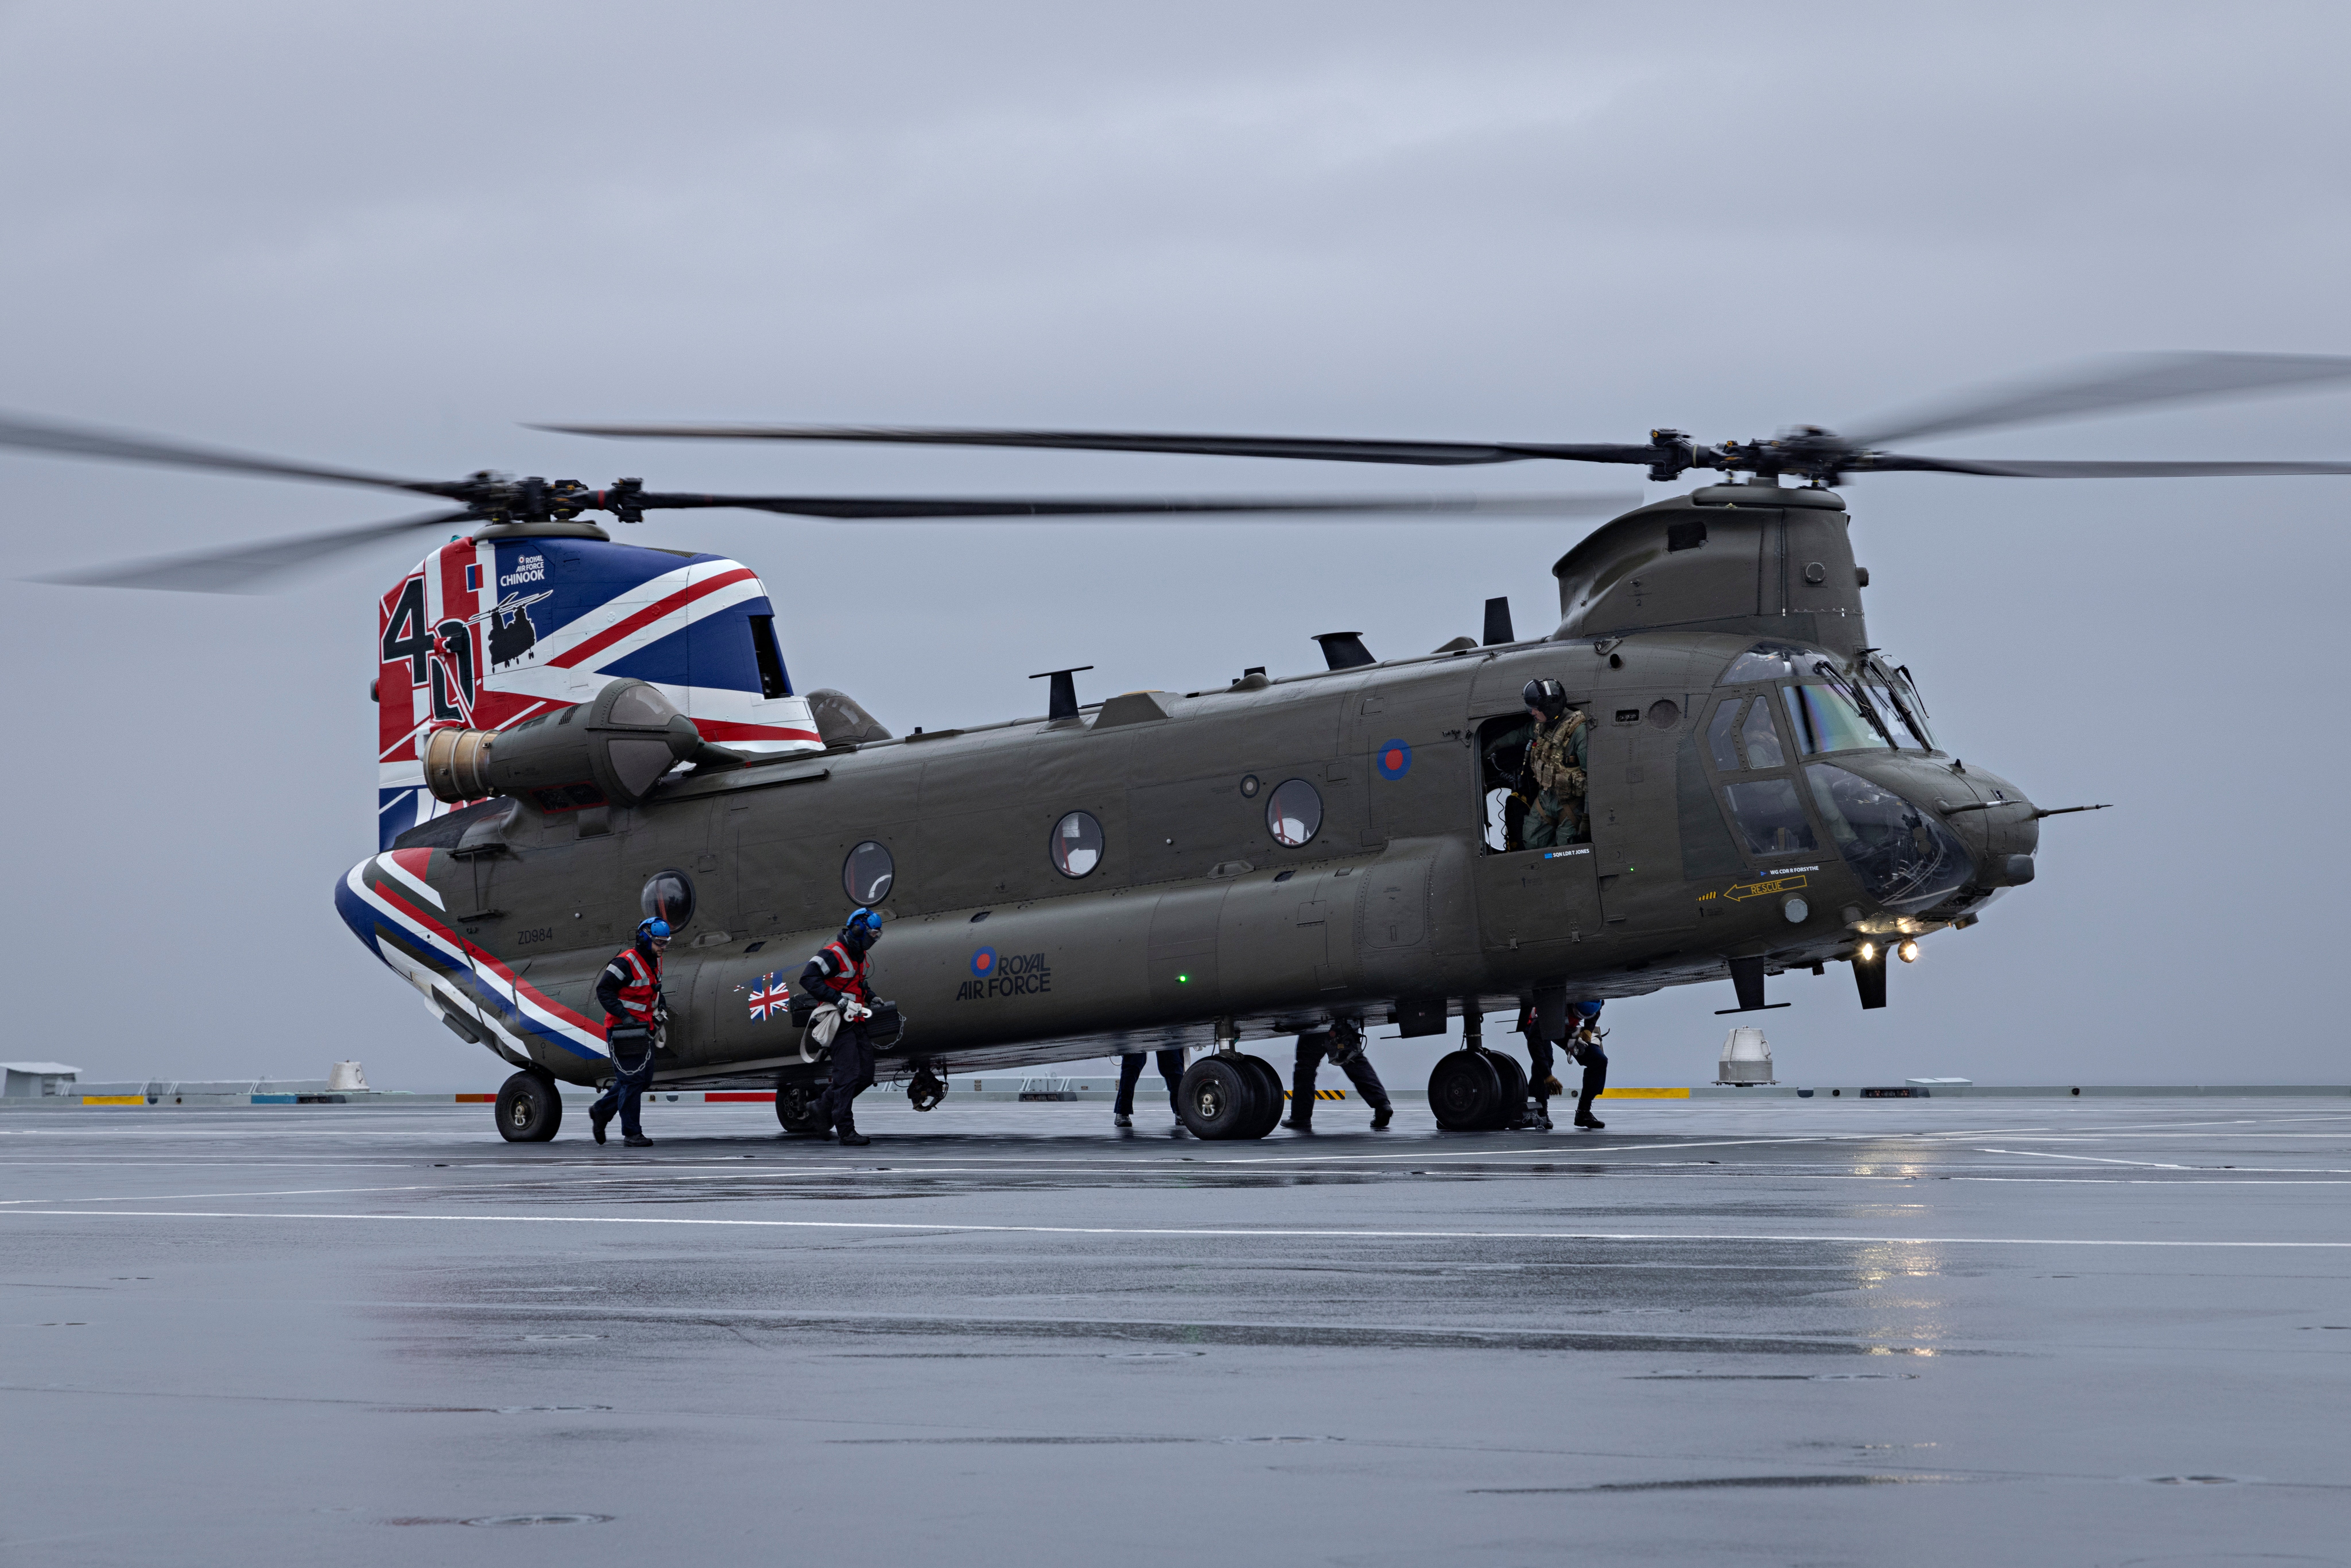 Royal Air Force Odiham celebrated the 40th anniversary of the Chinook helicopter entering RAF Service with a commemorative new colour scheme.

Pictured is a Chinook (CH47) from 27 Squadron, RAF Odiham which landed on the flight deck of HMS Prince Of Wales on 12th May 2021.

The helicopter displayed the red, white and blue colours to celebrate its 40th anniversary.

Throughout its 40 years of service the Chinook has made an immeasurable contribution to the Service, supporting communities across the UK and operating in every major conflict since the Falklands War.